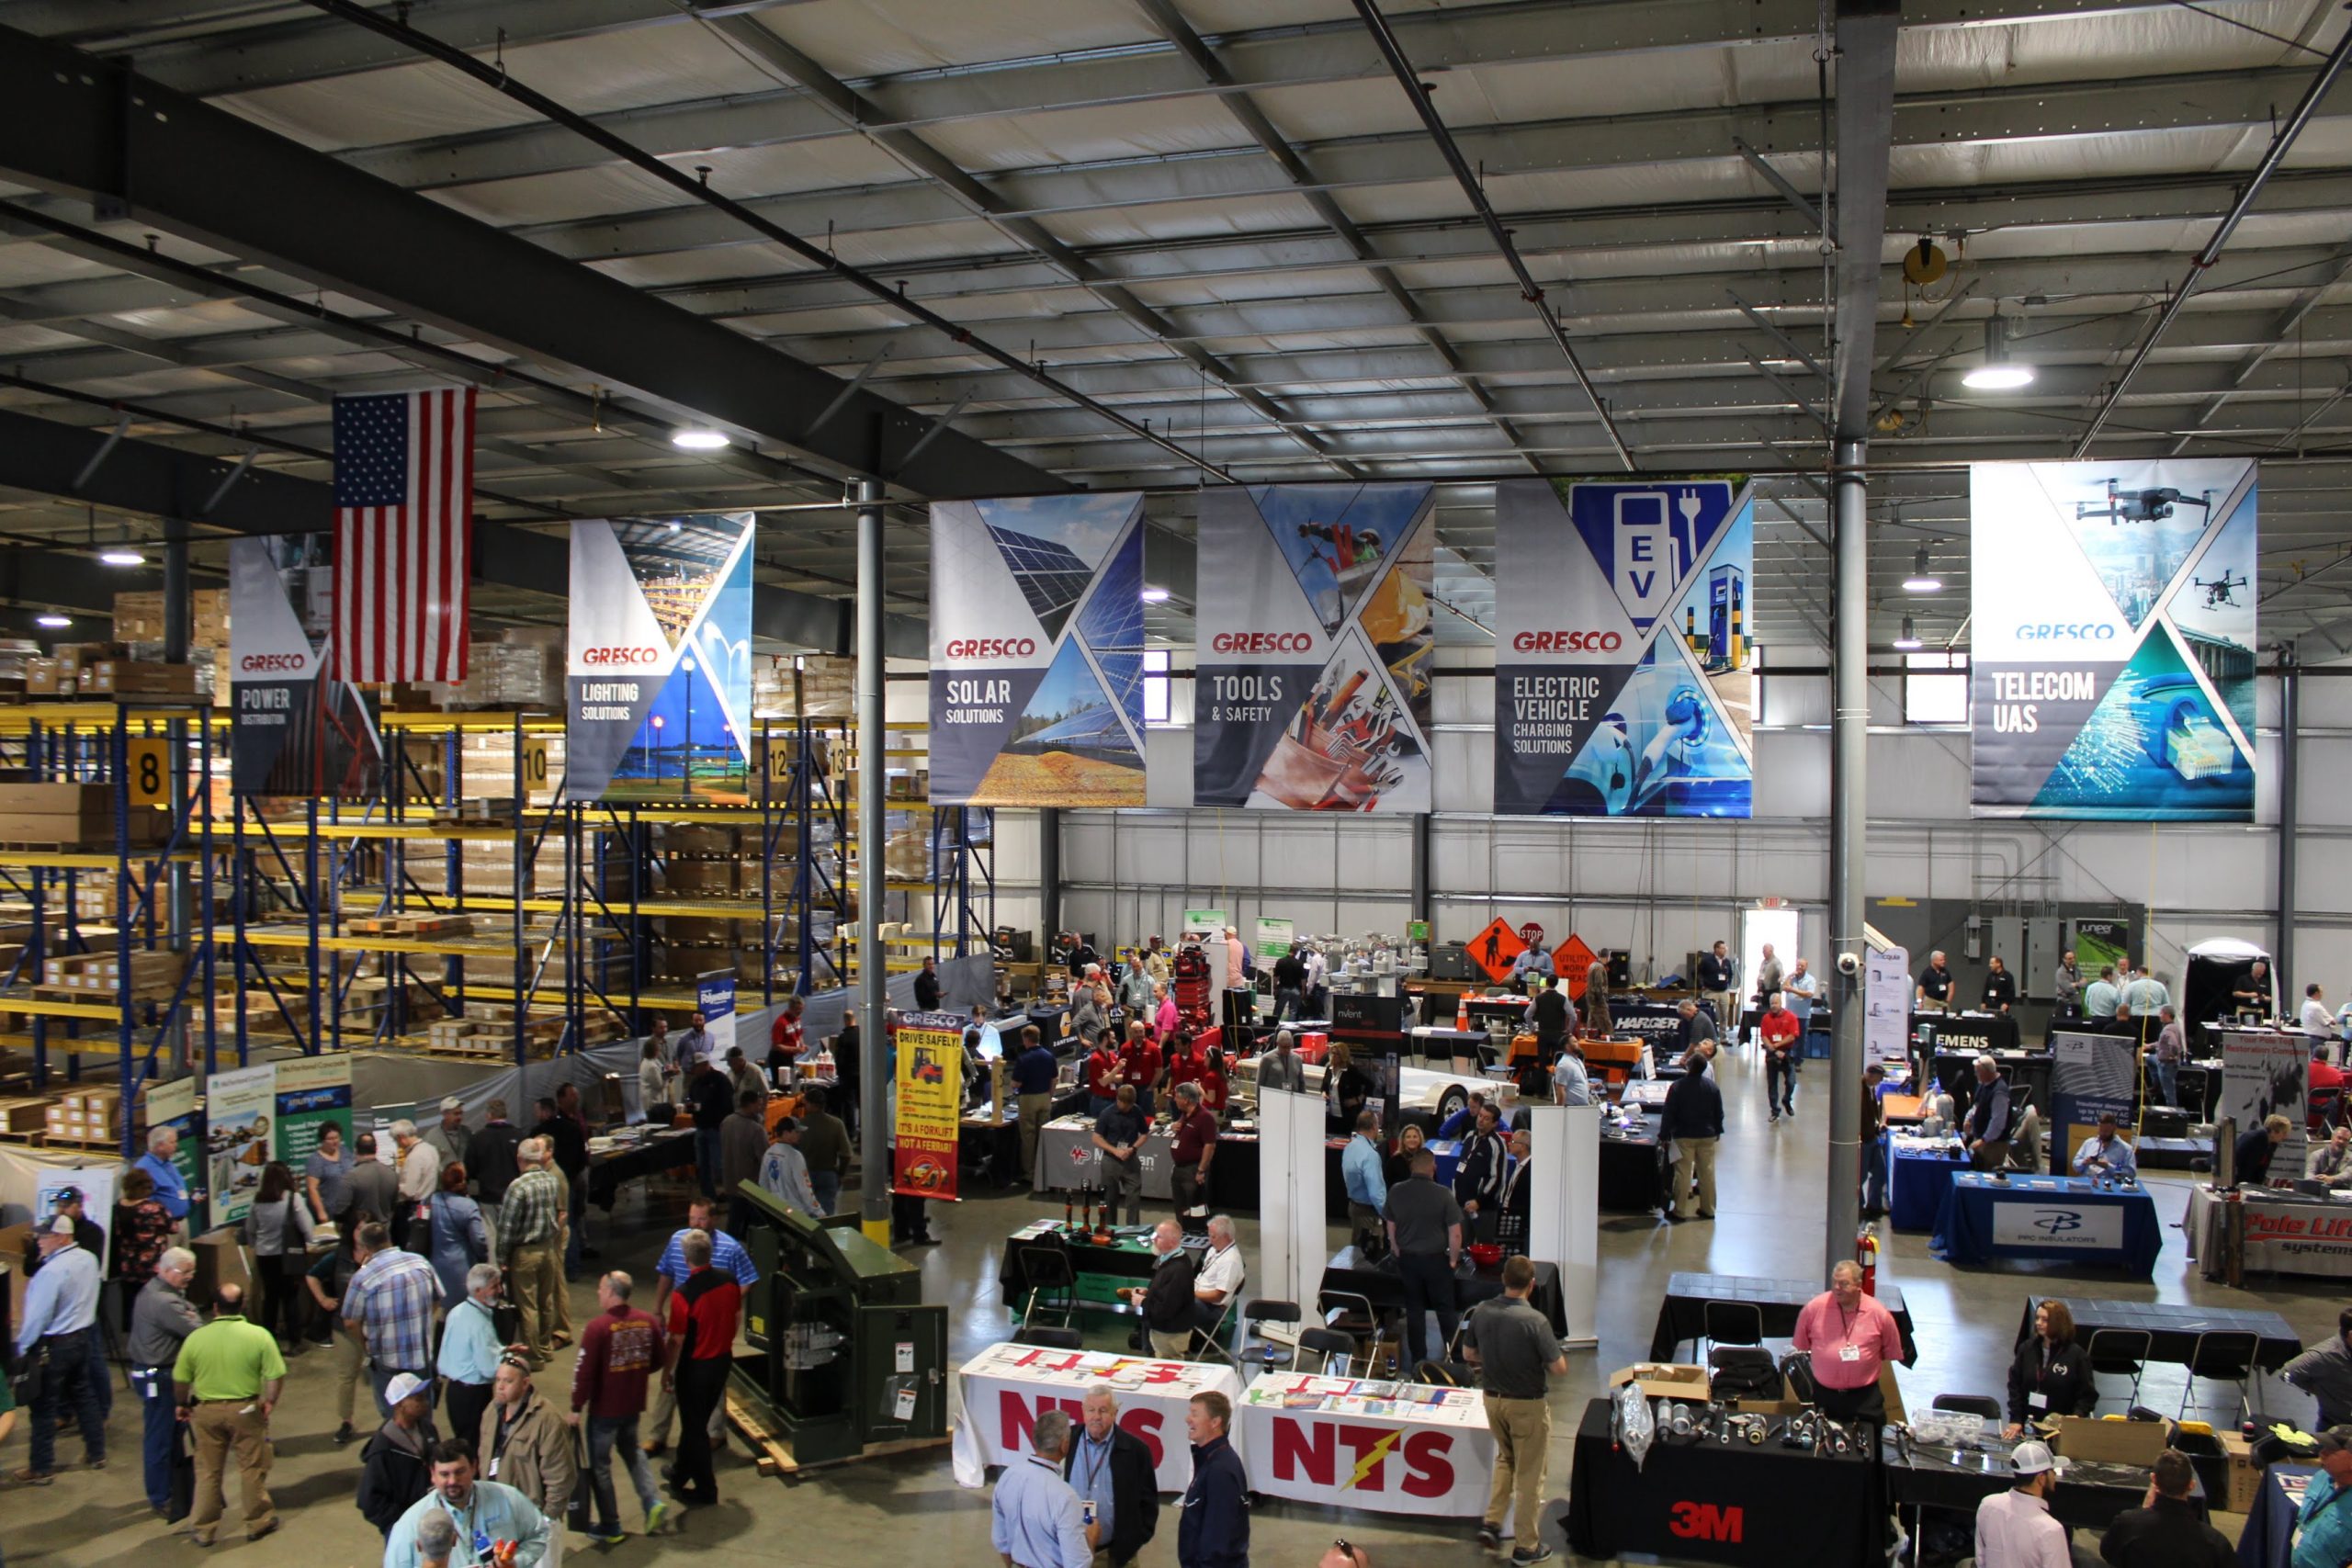 Gresco 19th Annual Expo - vendors, clients, and employees mingle in the Gresco warehouse under Gresco banners.